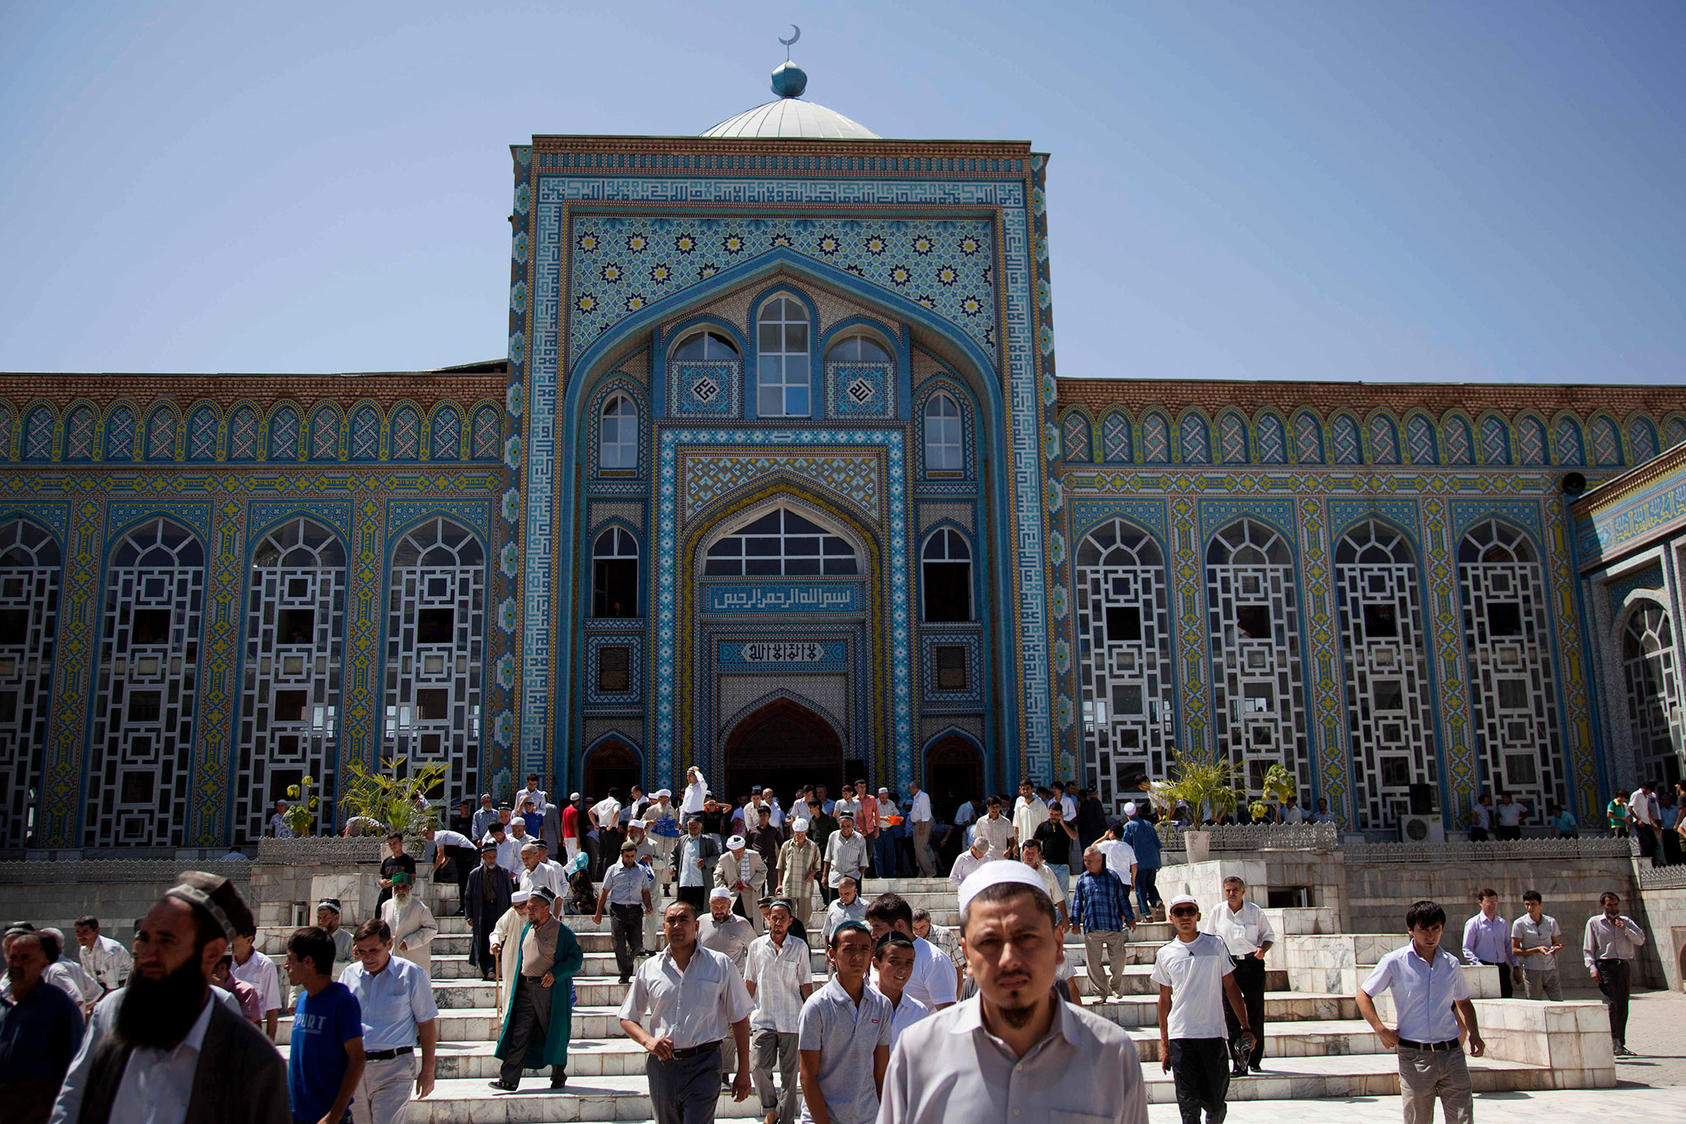 Worshipers gather for Friday prayers during Ramadan in Dushanbe's Central Mosque in Tajikistan, on August 19, 2011. (Photo by Theodore Kaye/AP)